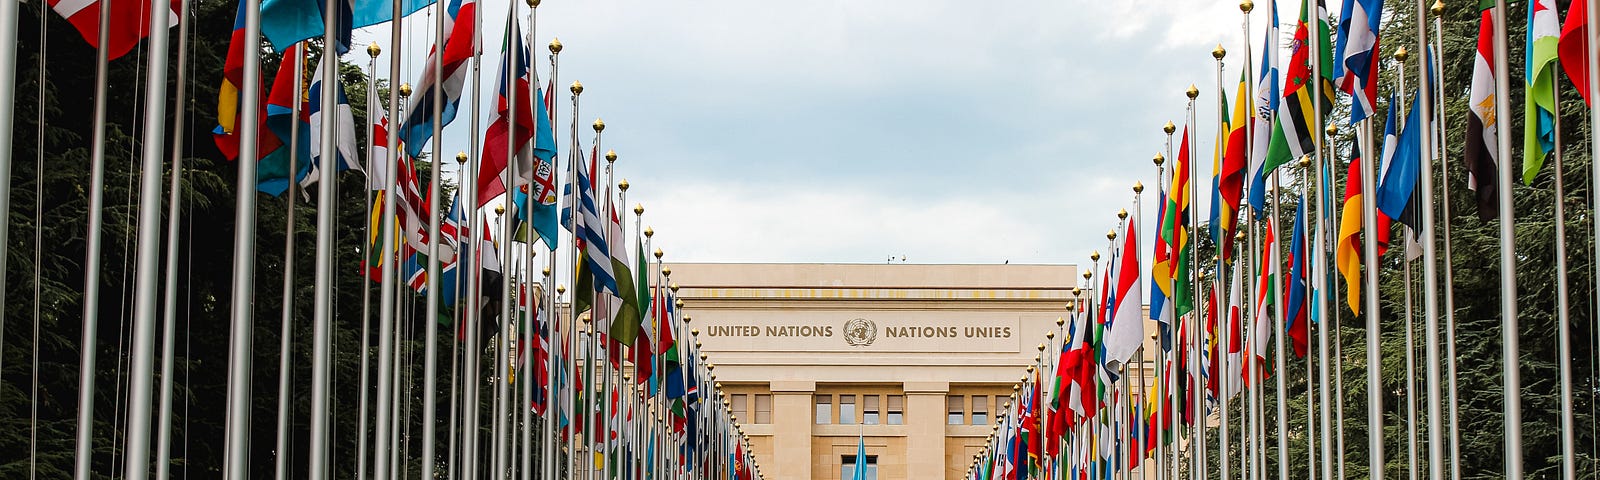 pic of The United Nations